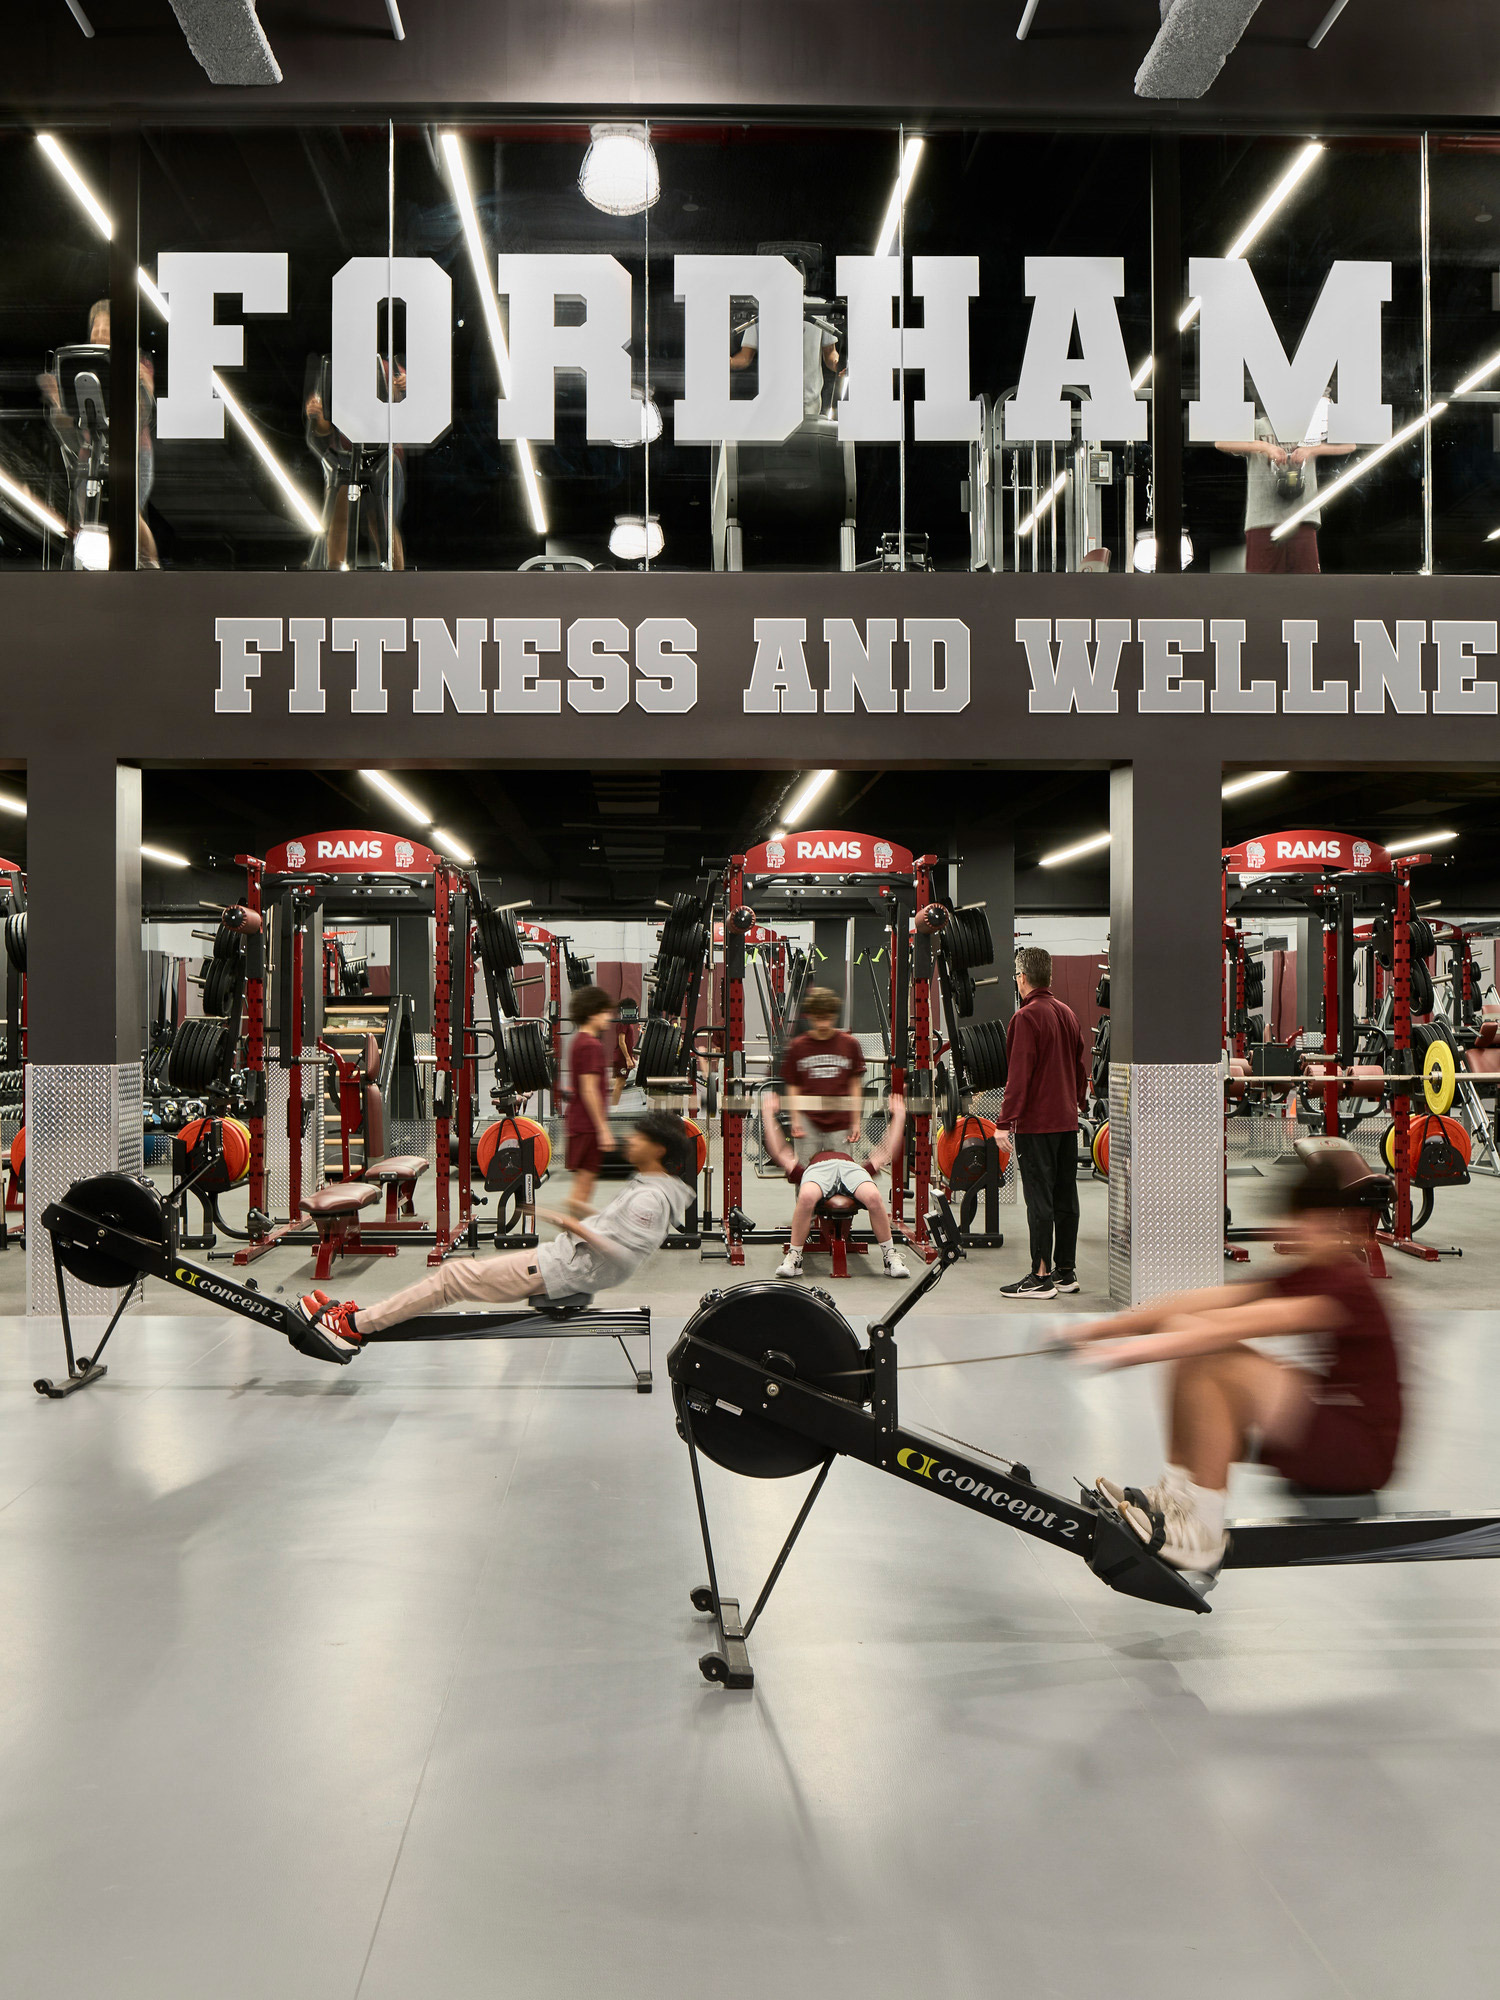 Modern gym interior with black walls, red and gray fitness equipment, and large bold 'FORDHAM FITNESS AND WELLNESS' lettering on mirror-finished ceiling above. People are actively using rowing machines and strength-training apparatus, indicating a dynamic and well-facilitated workout environment.